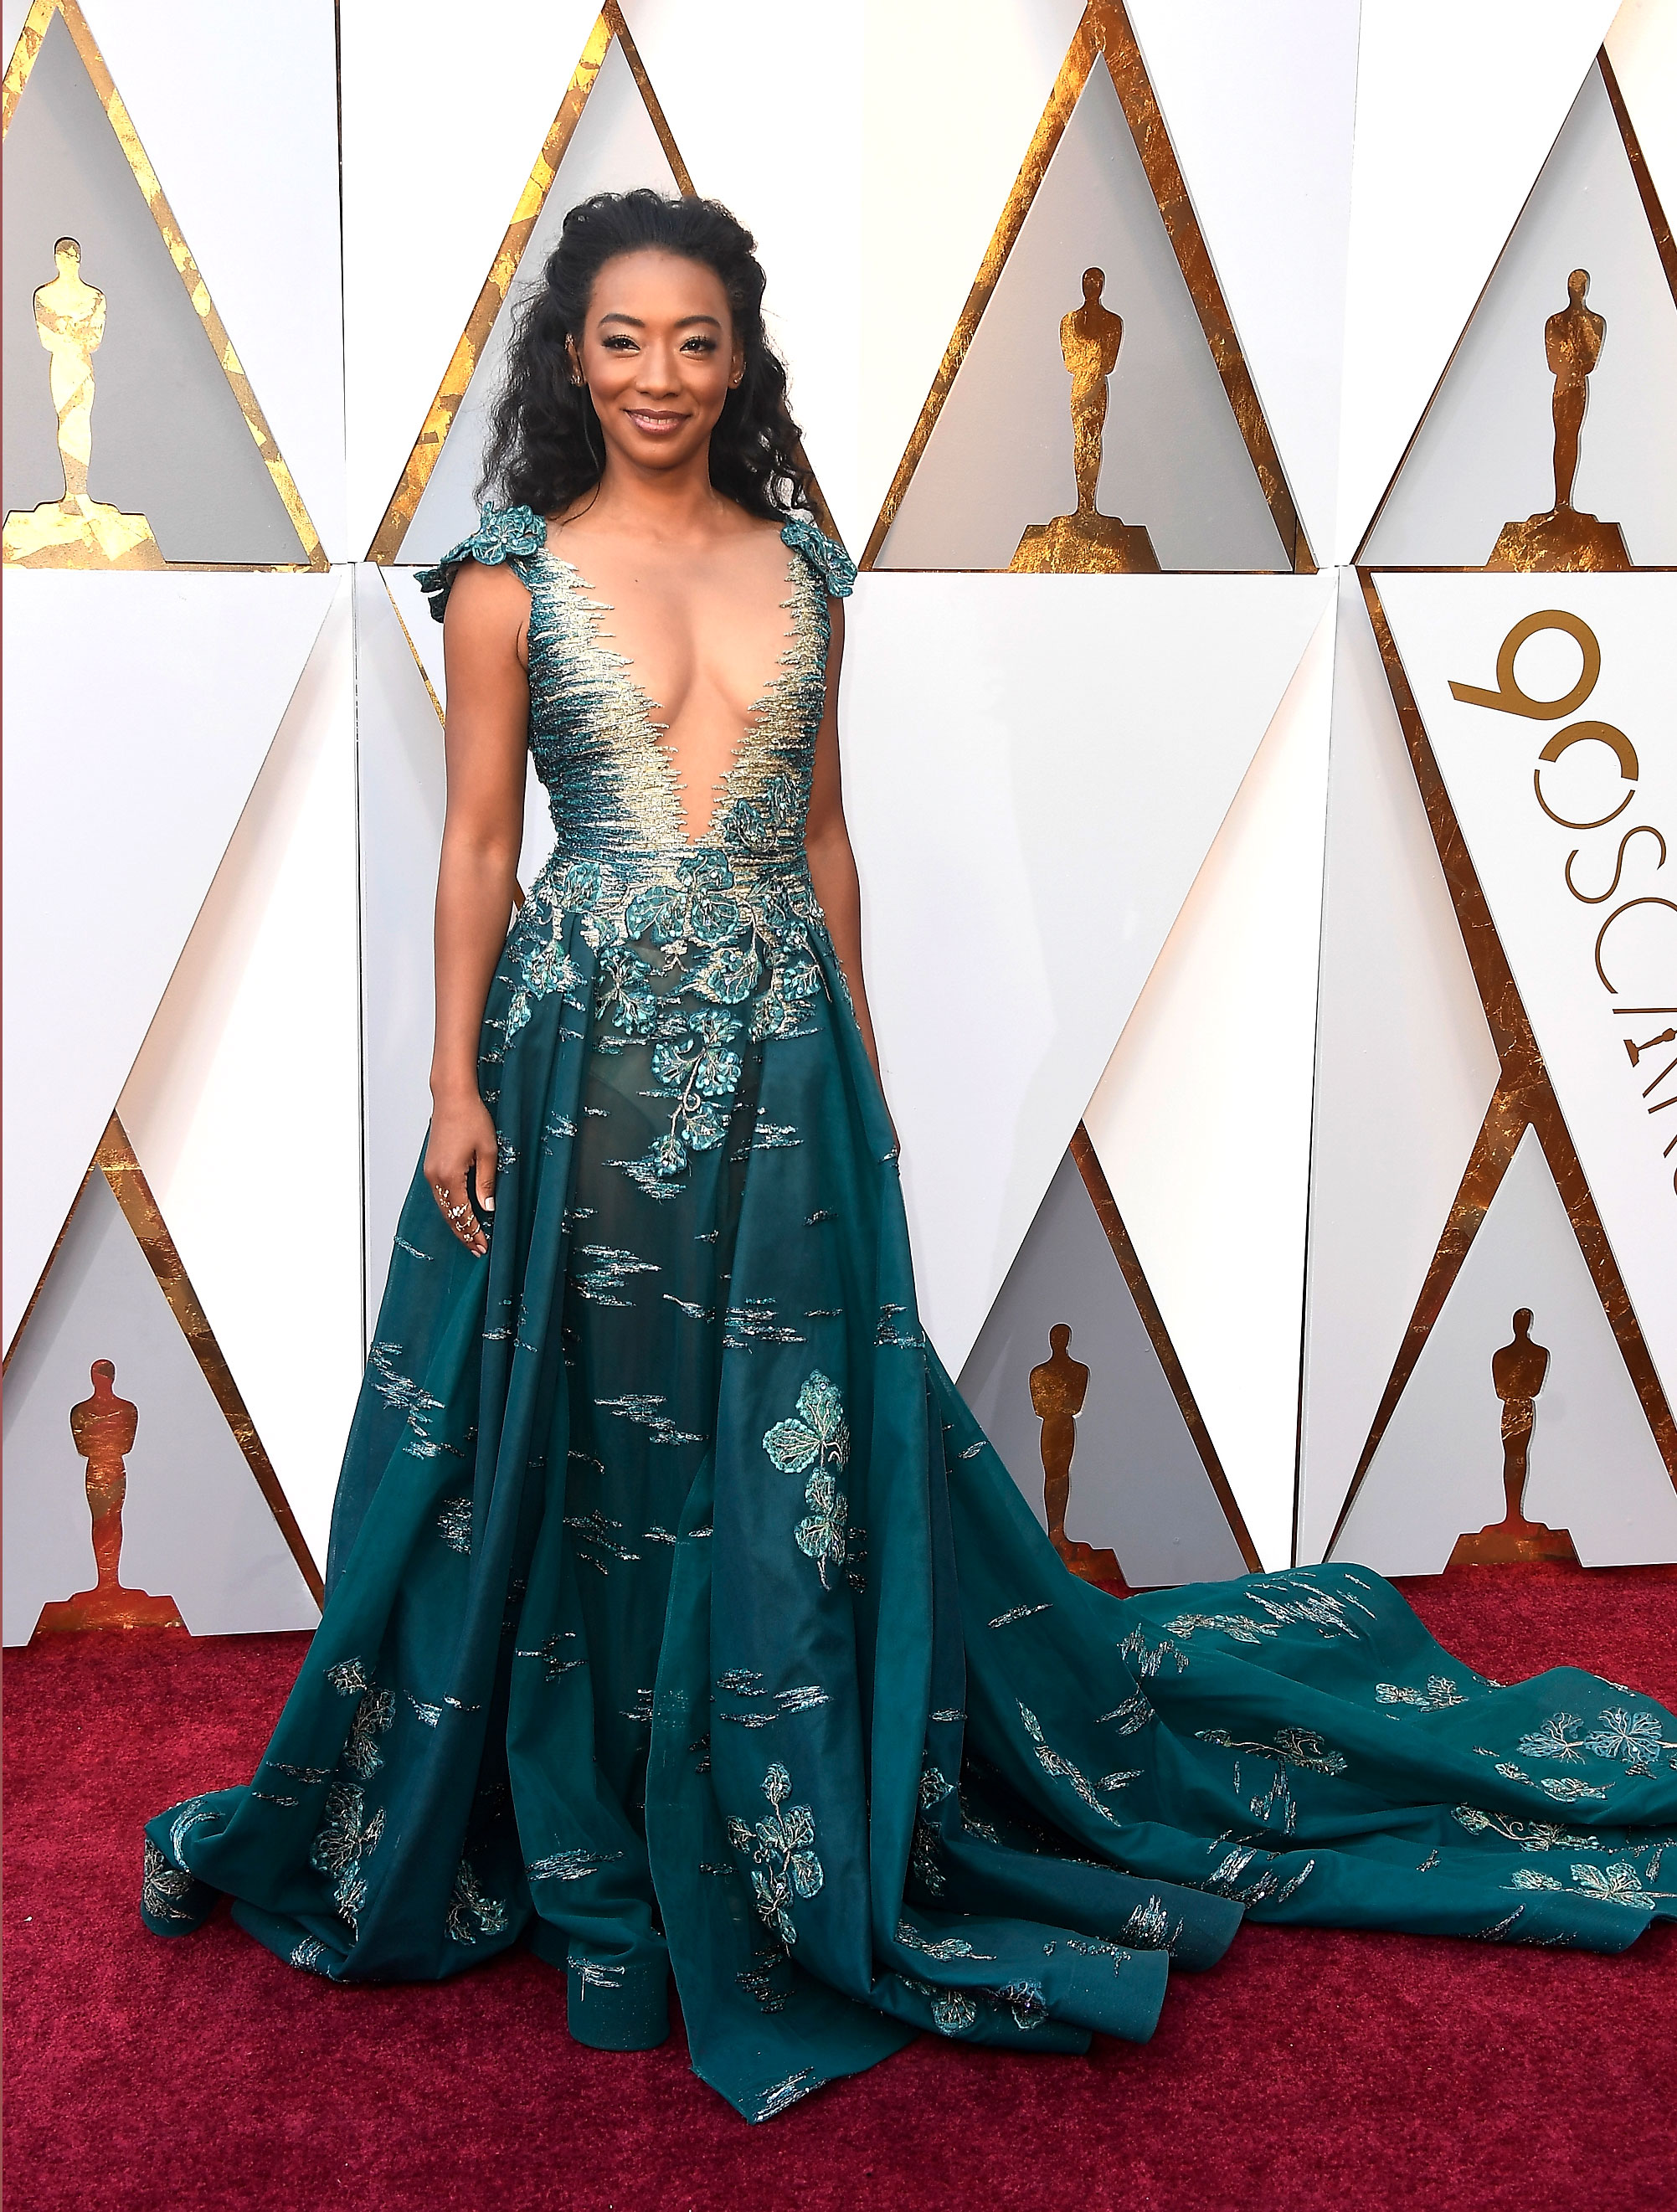 Oscars 2018 Red Carpet Fashion See Stars Dresses, Gowns